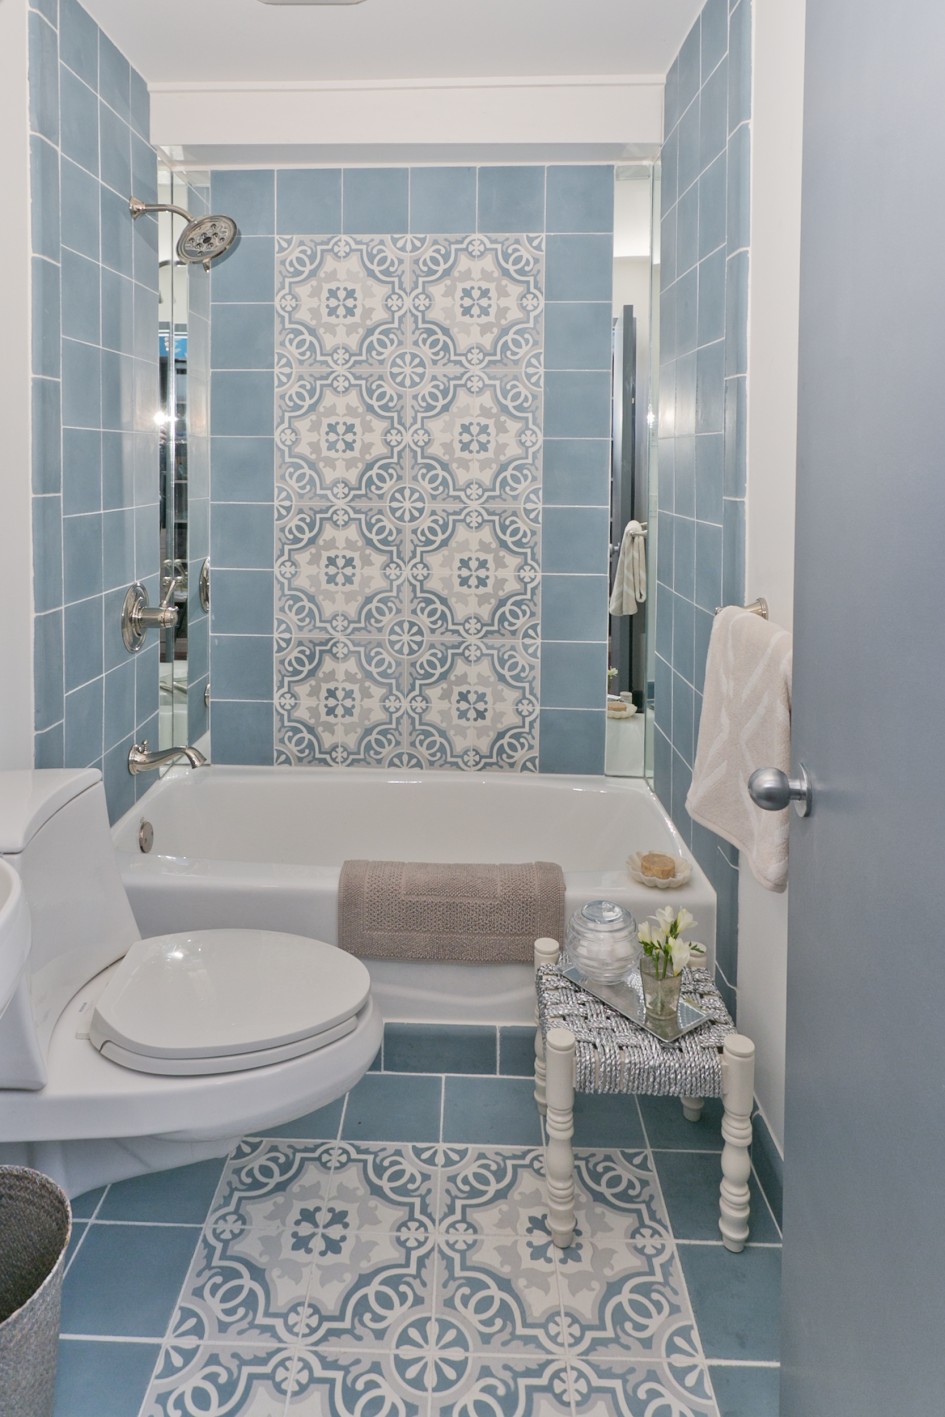 30 great pictures and ideas of old fashioned bathroom tile ...